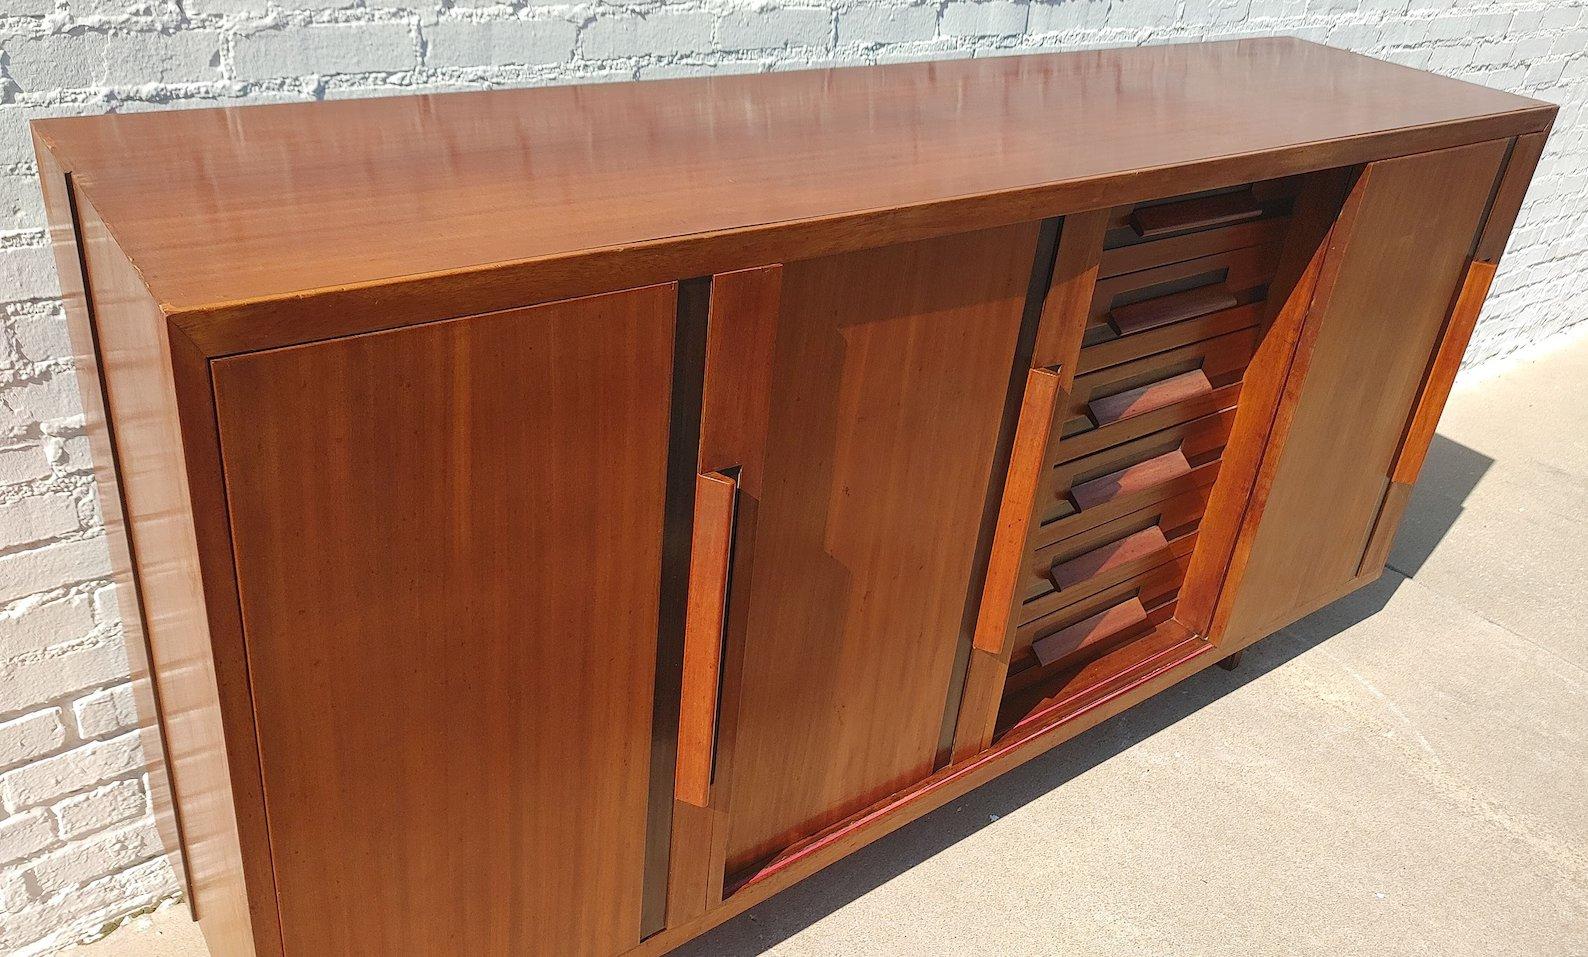 Mid Century Modern Italian Modern Teak Cabinet

Average vintage condition and structurally sound. Has some expected finish wear and scratching. Several of the sliding doors have splits in the lower part of the door. Has some veneer chips on edges in